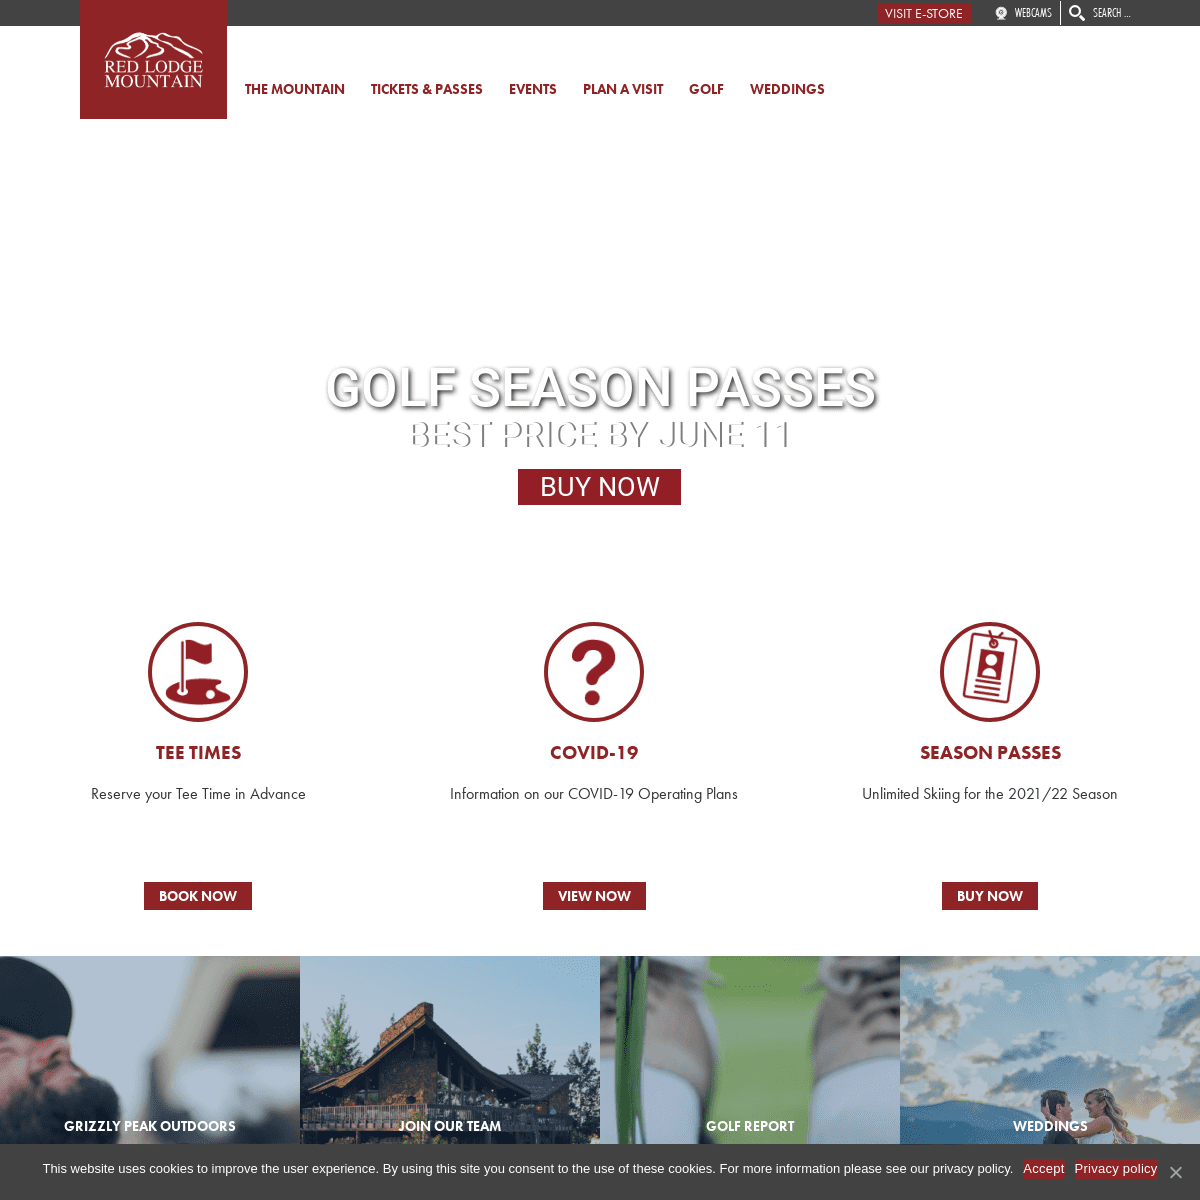 A complete backup of https://redlodgemountain.com